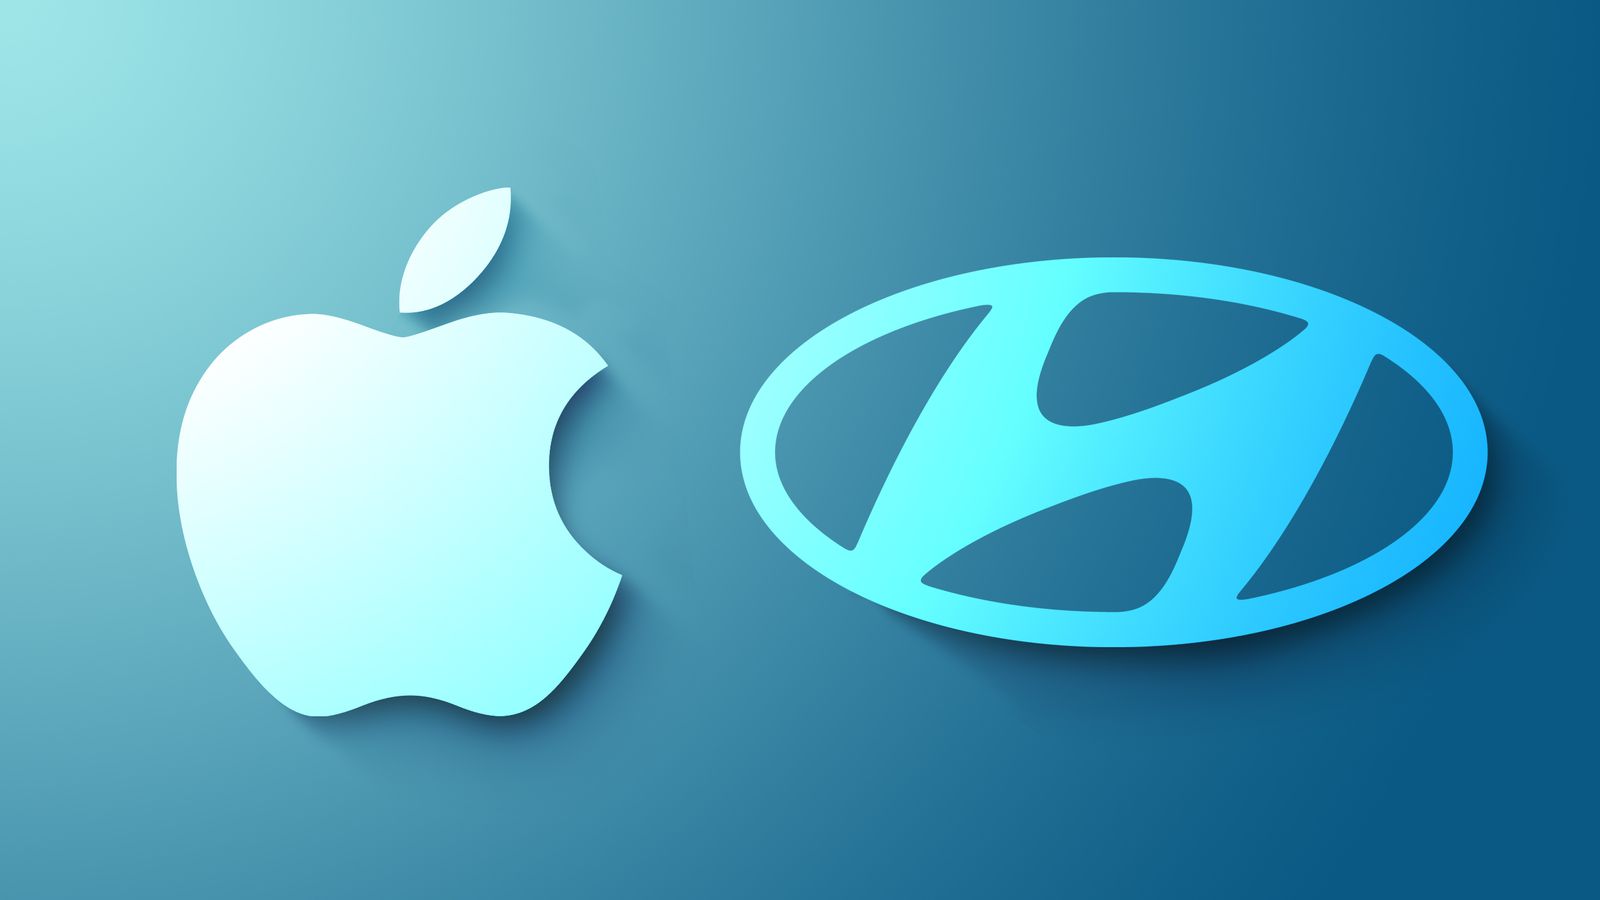 Apple and Hyundai to Sign Apple Car Deal by March With Production Beginning in 2024 - MacRumors